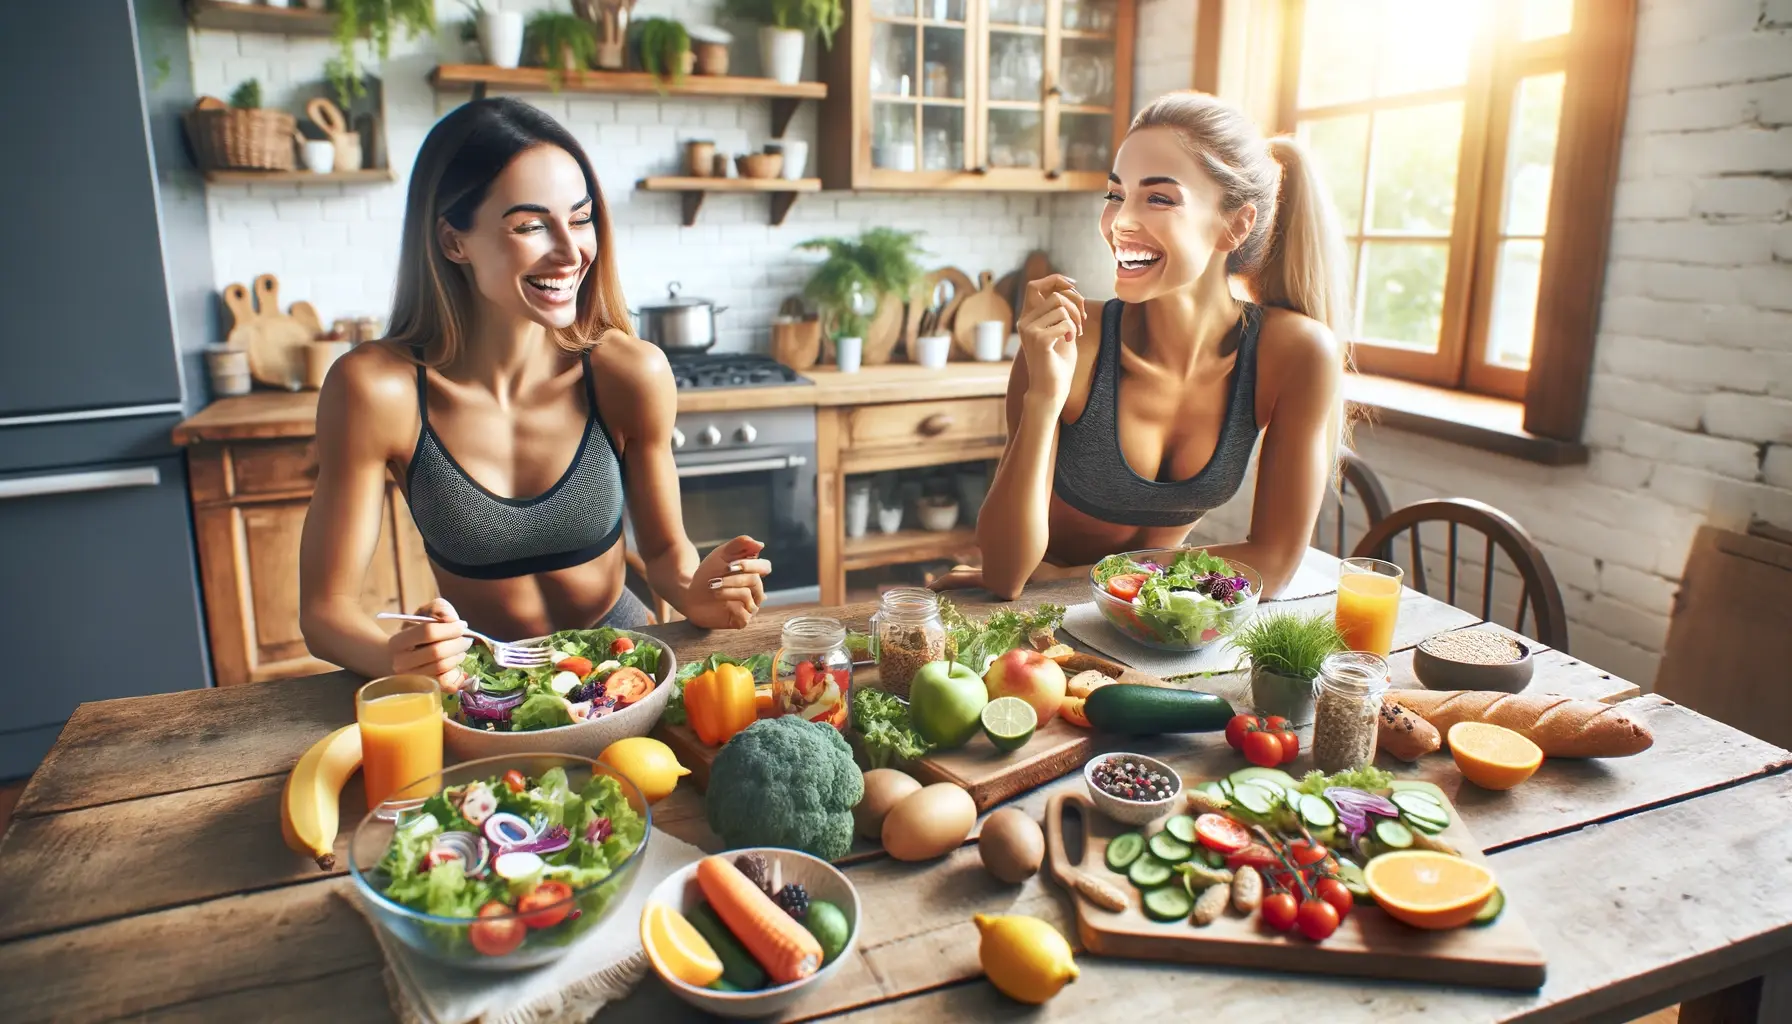 Fit women happily enjoying healthy foods together around a large wooden table in a bright kitchen, showcasing camaraderie and balanced nutrition.